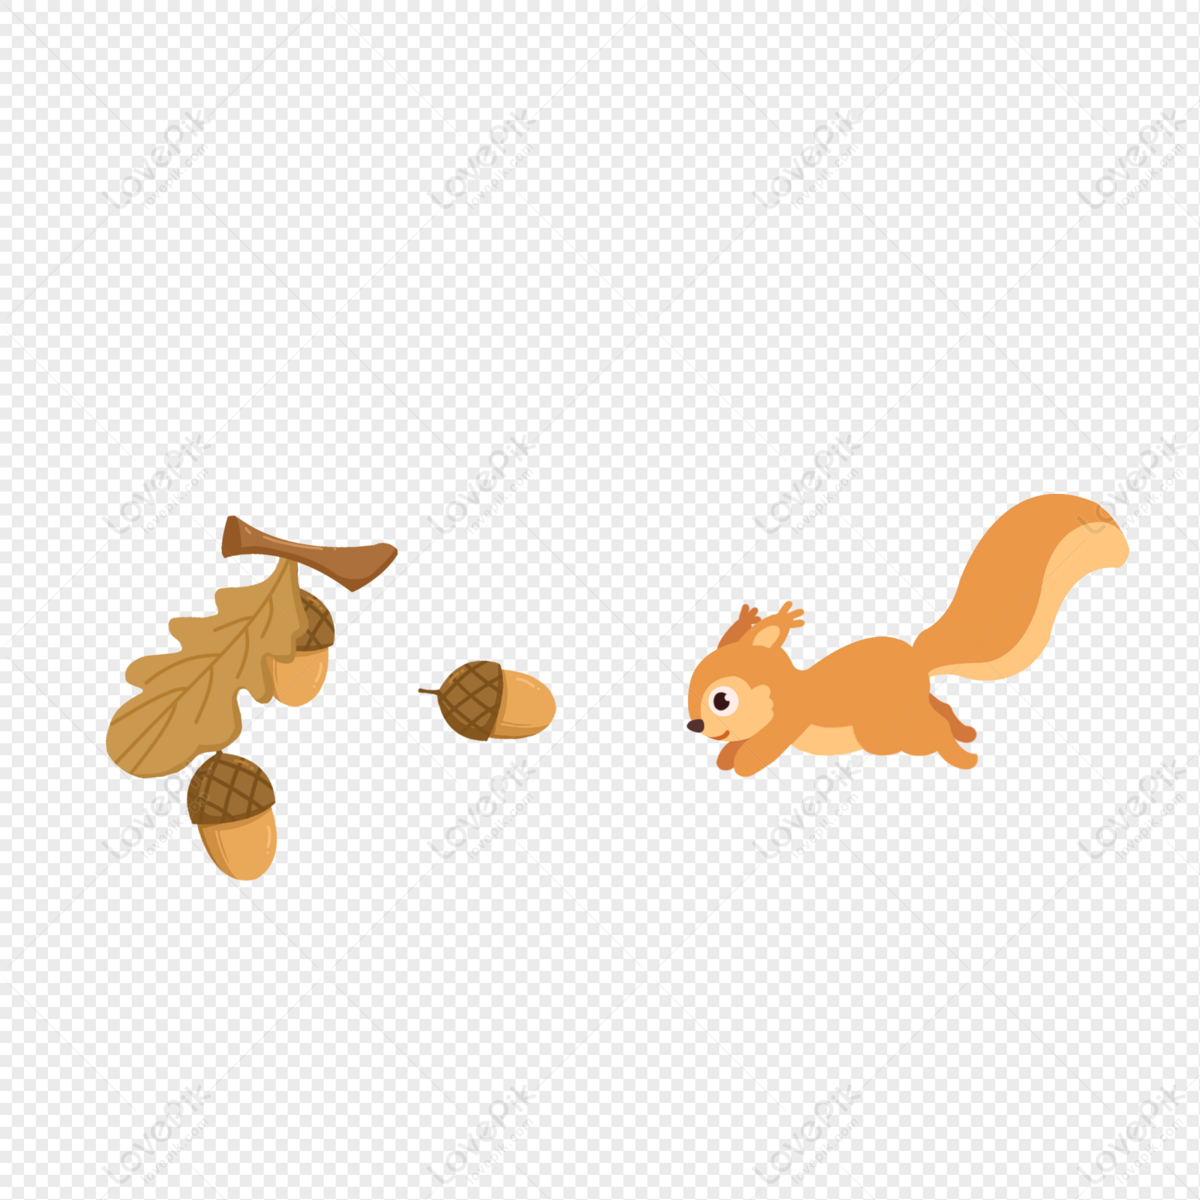 Squirrel Hazelnut Cartoon Element PNG Image Free Download And Clipart Image  For Free Download - Lovepik | 401783911